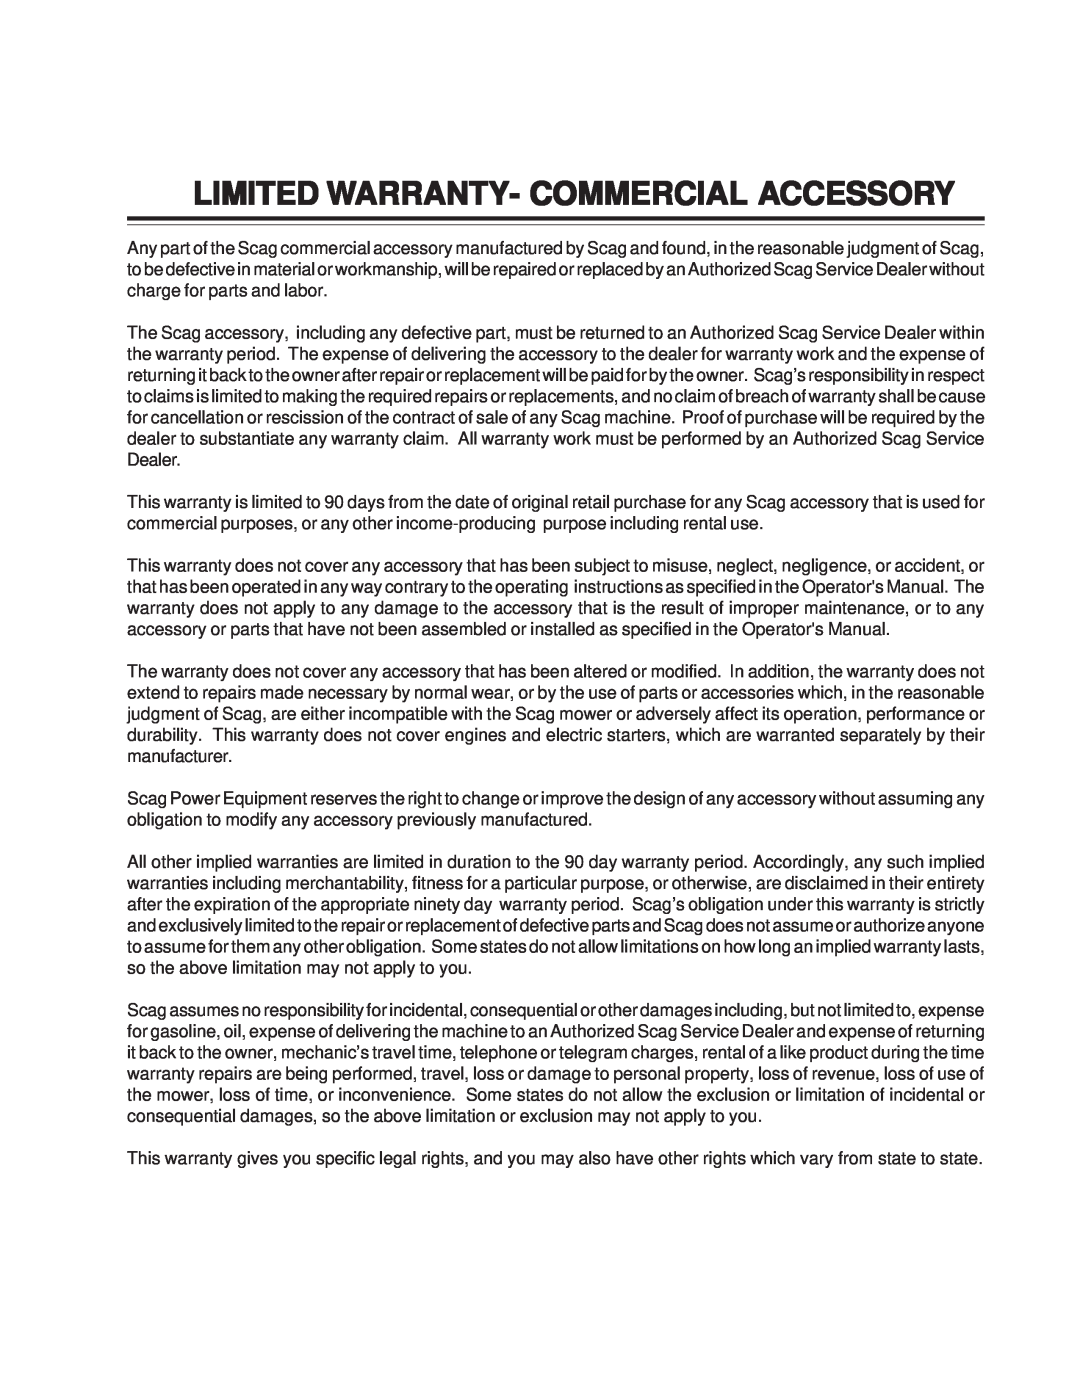 Scag Power Equipment RS-ZT manual Limited Warranty- Commercial Accessory 